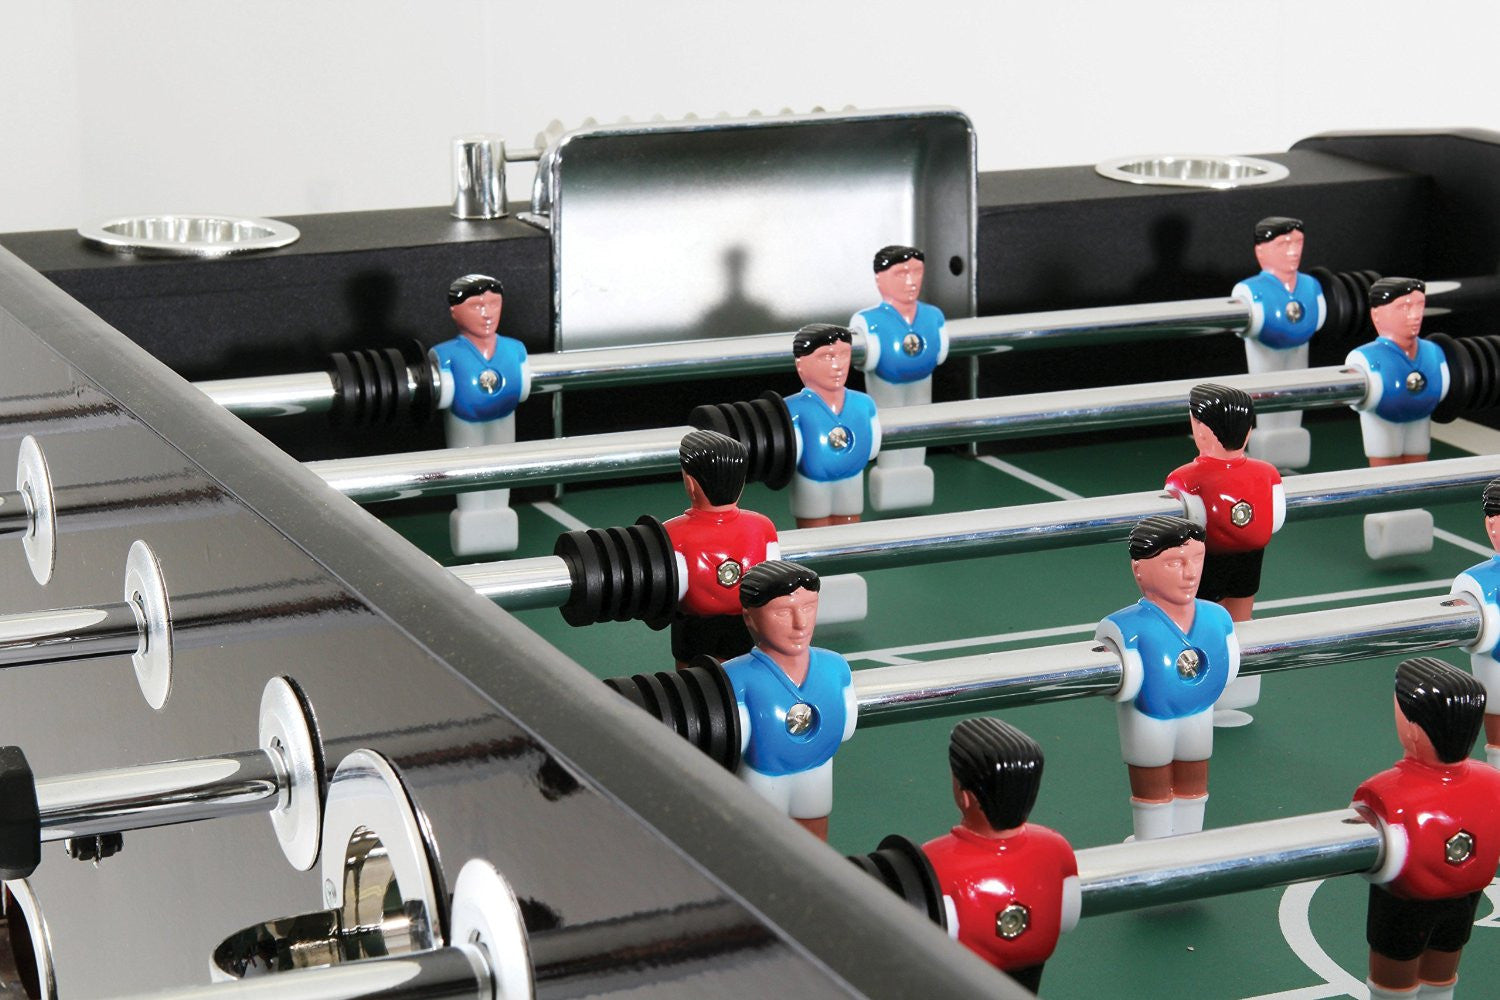 Players on a by DMI Sports Euro Star Foosball Table by Atomic available at Foosball Planet.